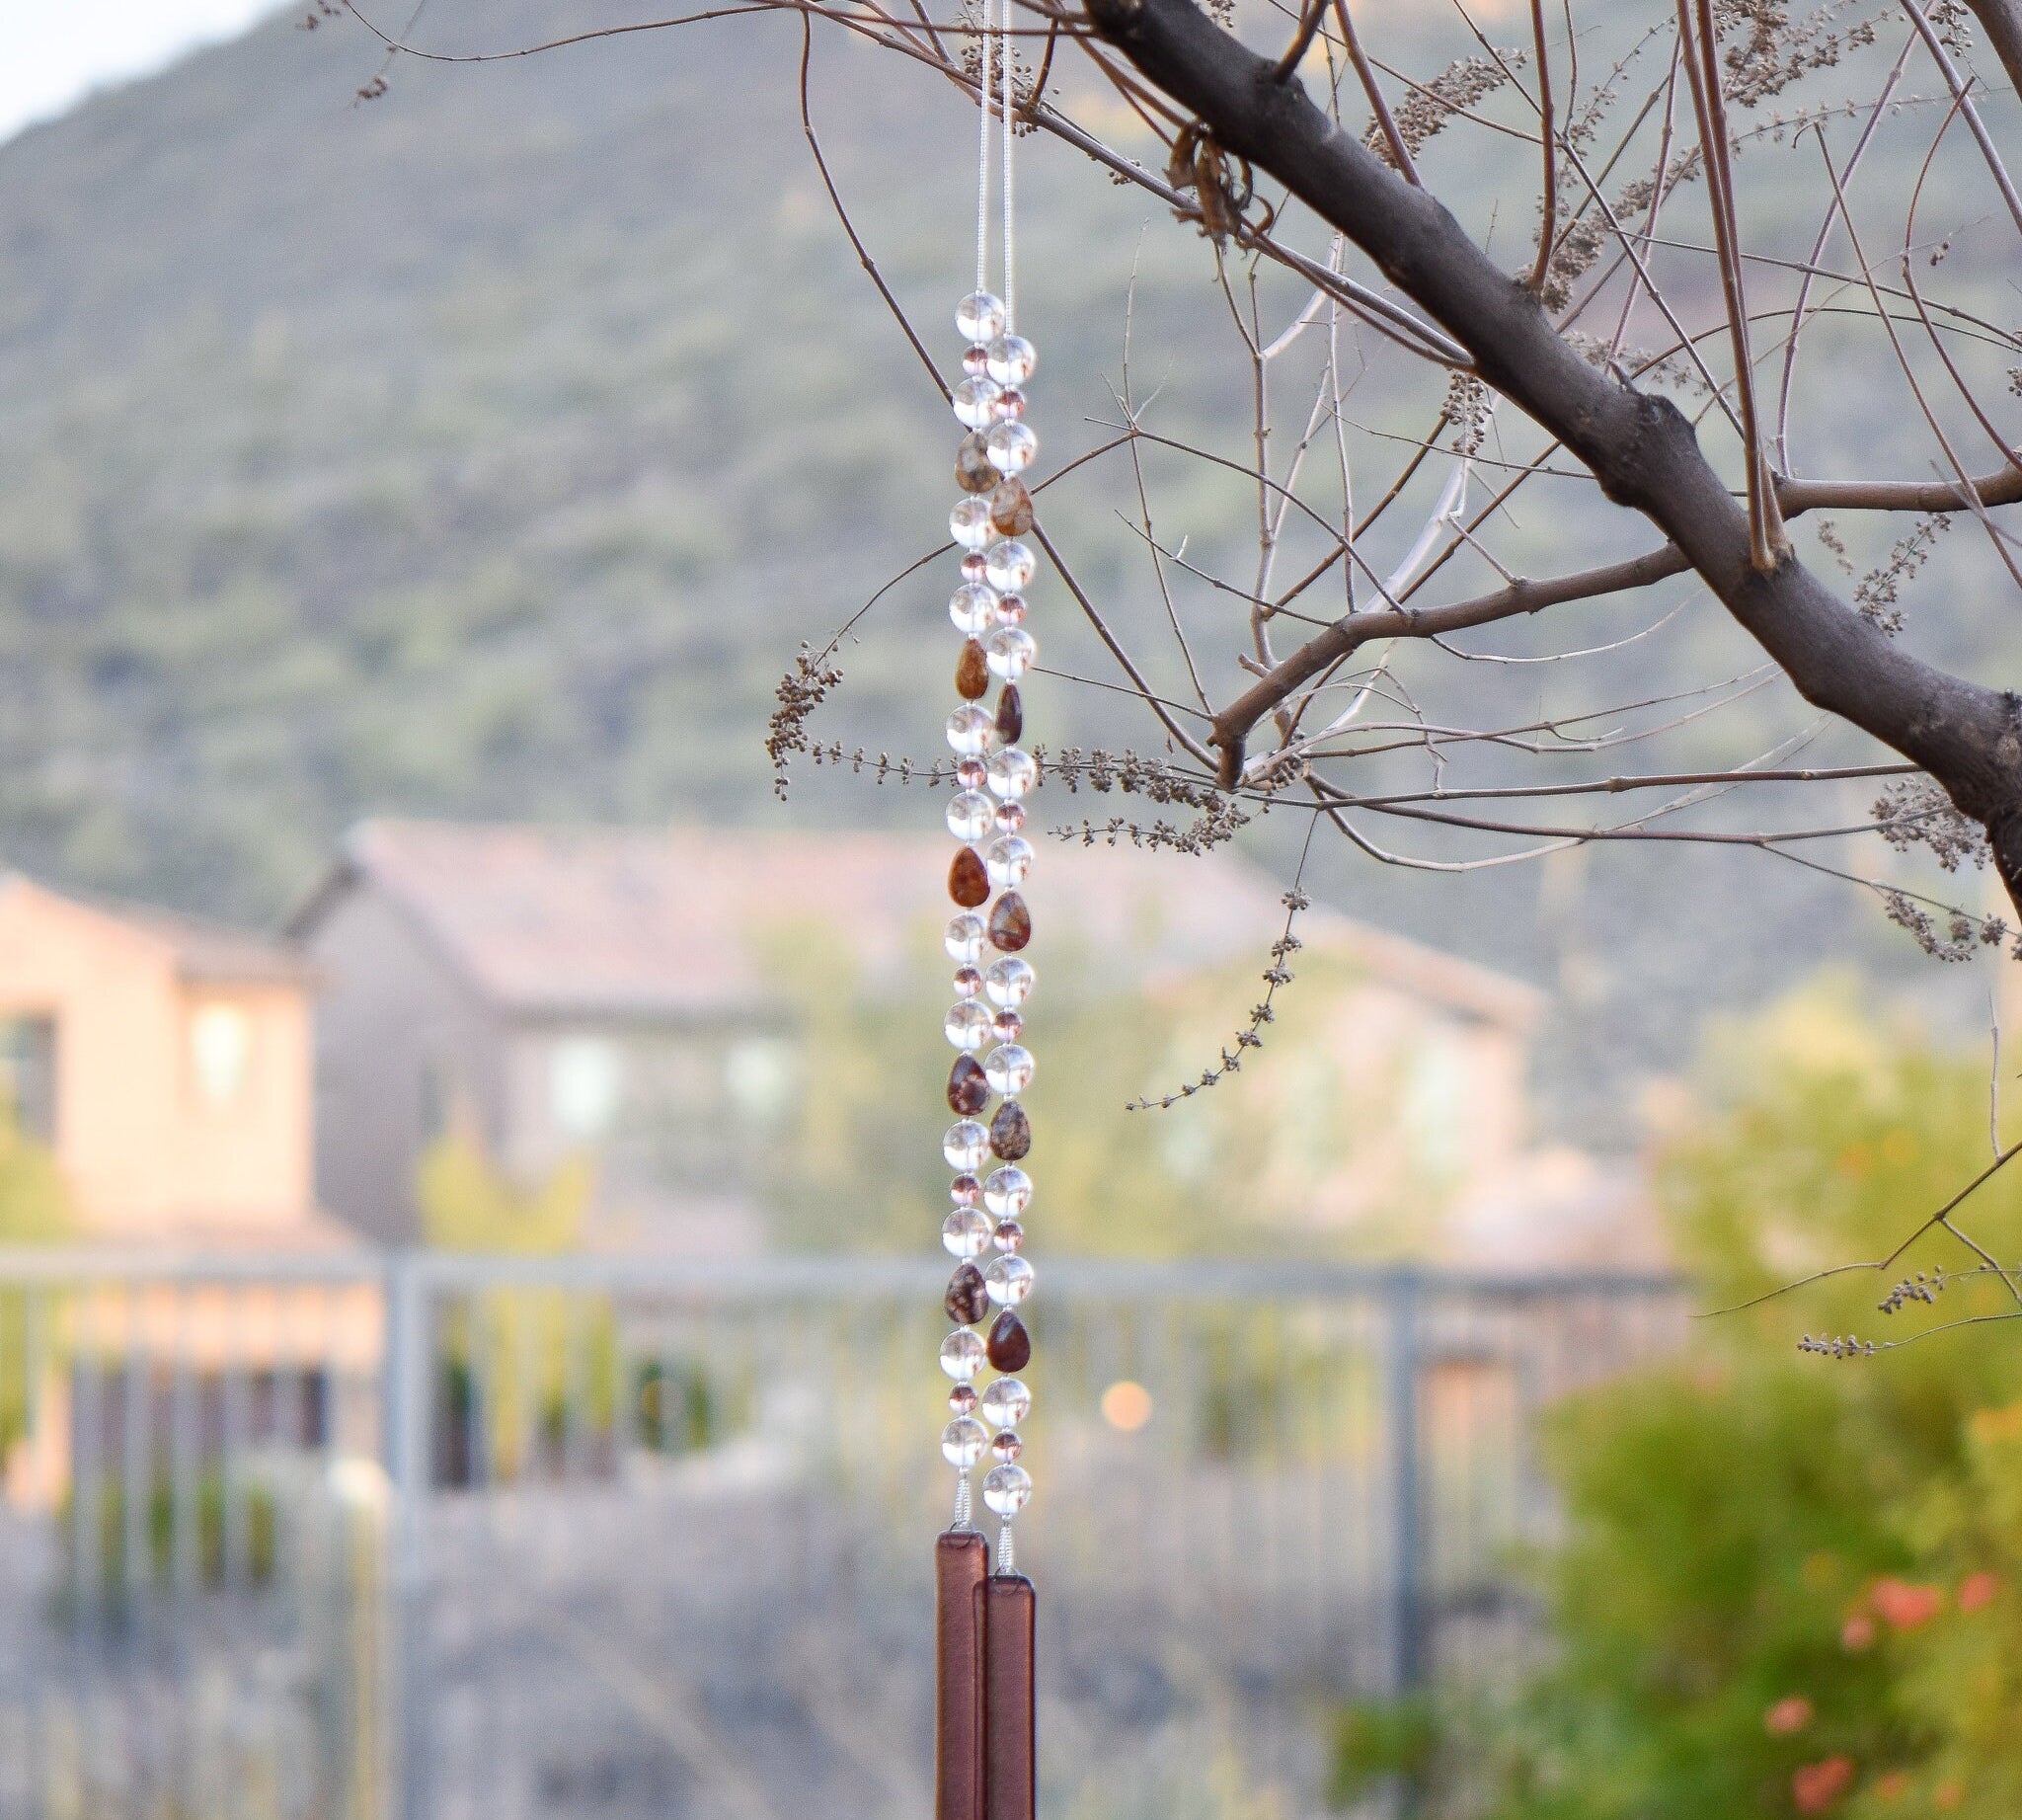 Purple Glass and Rhyolite Sun-Catcher Wind Chime for the Patio, Porch or Garden - add Relaxation to your Outdoor Space